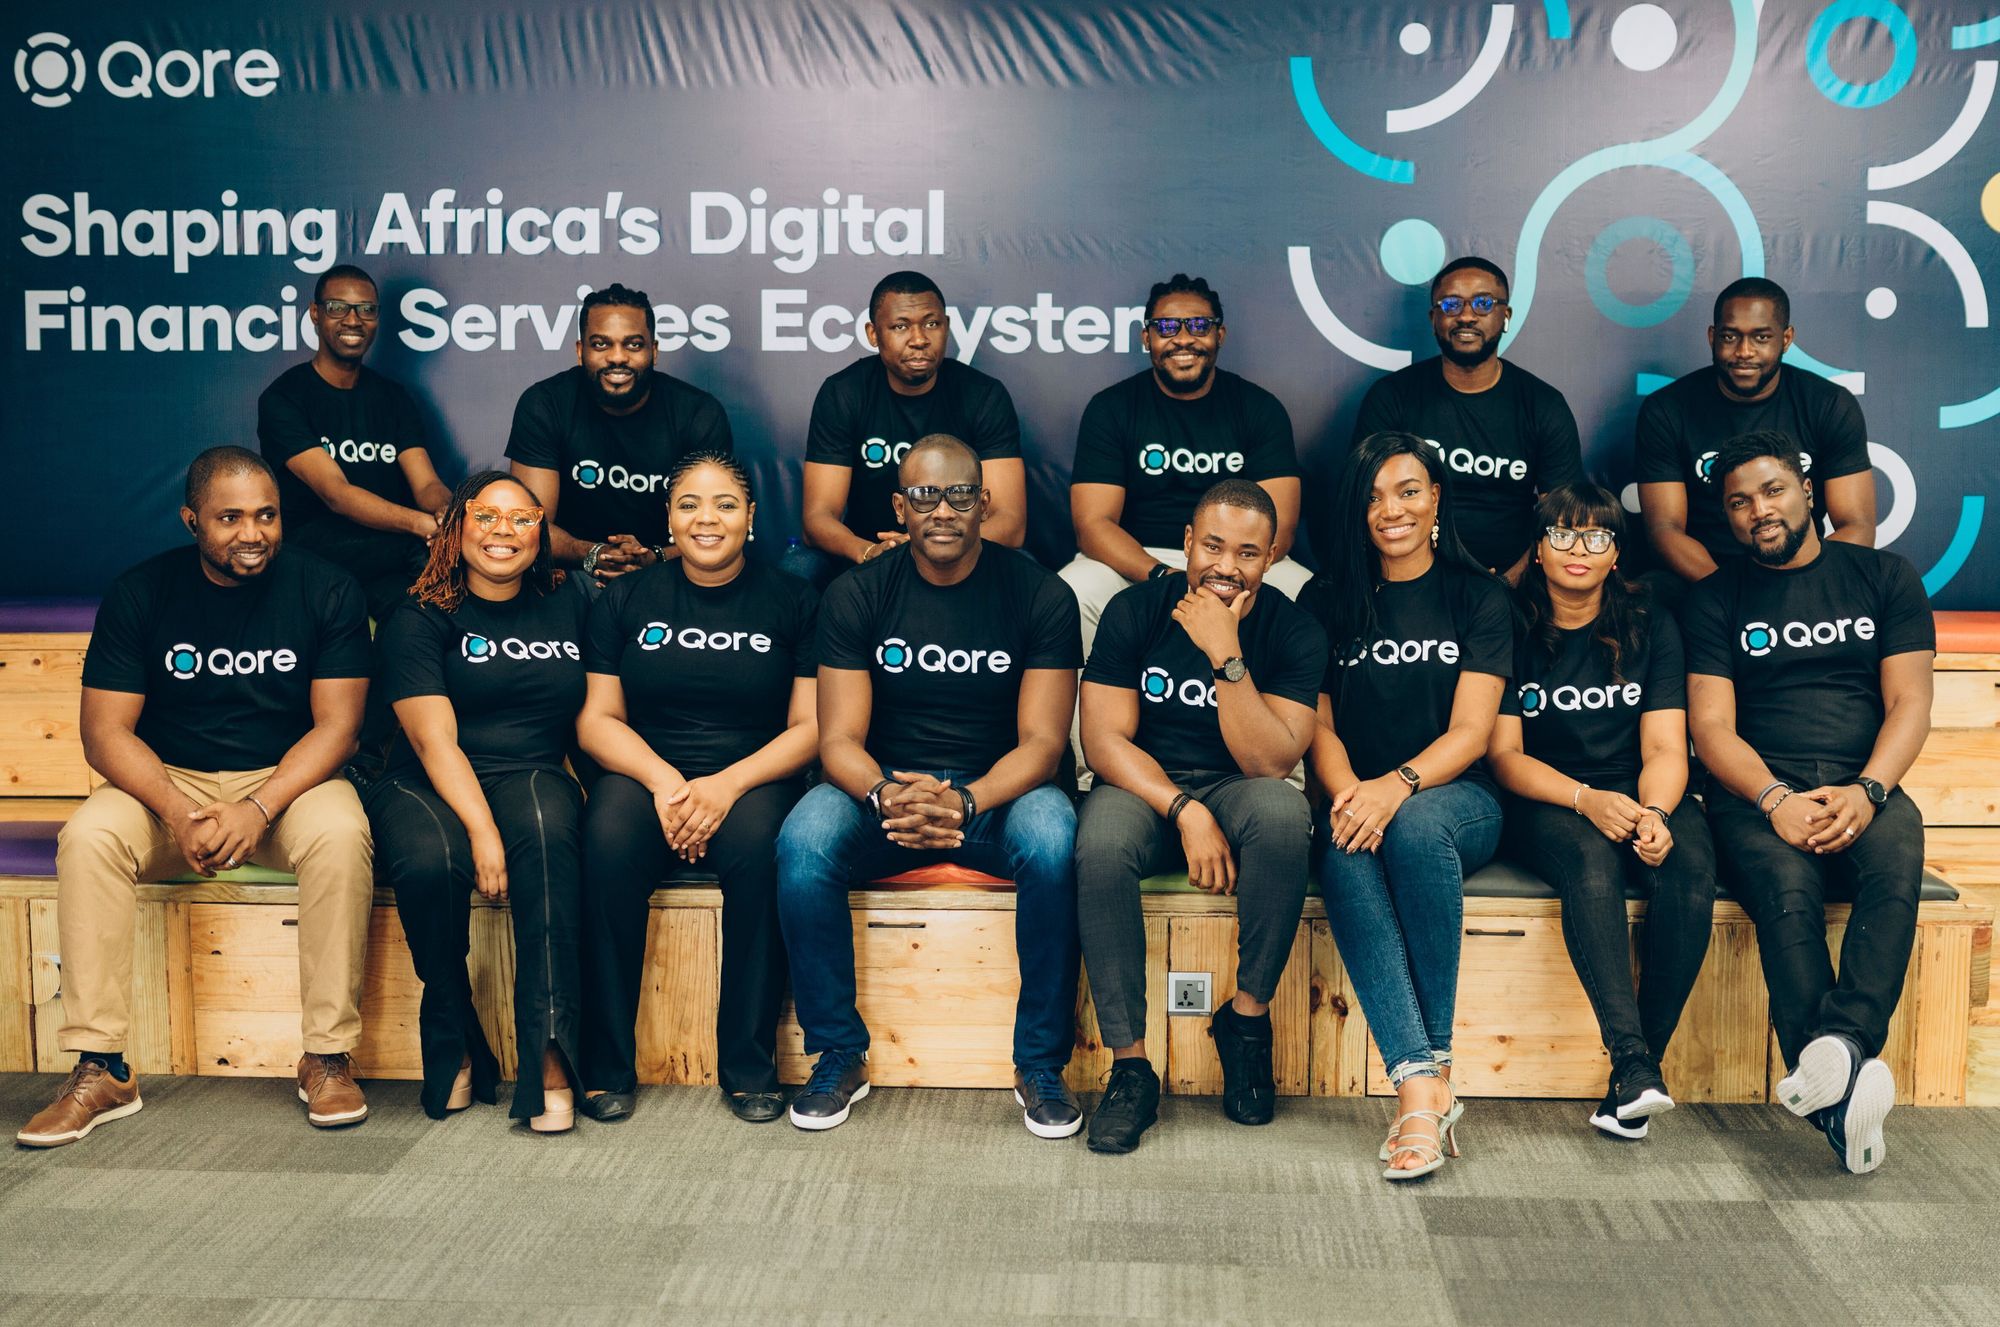 Qore is providing technology for digitising banks across Africa